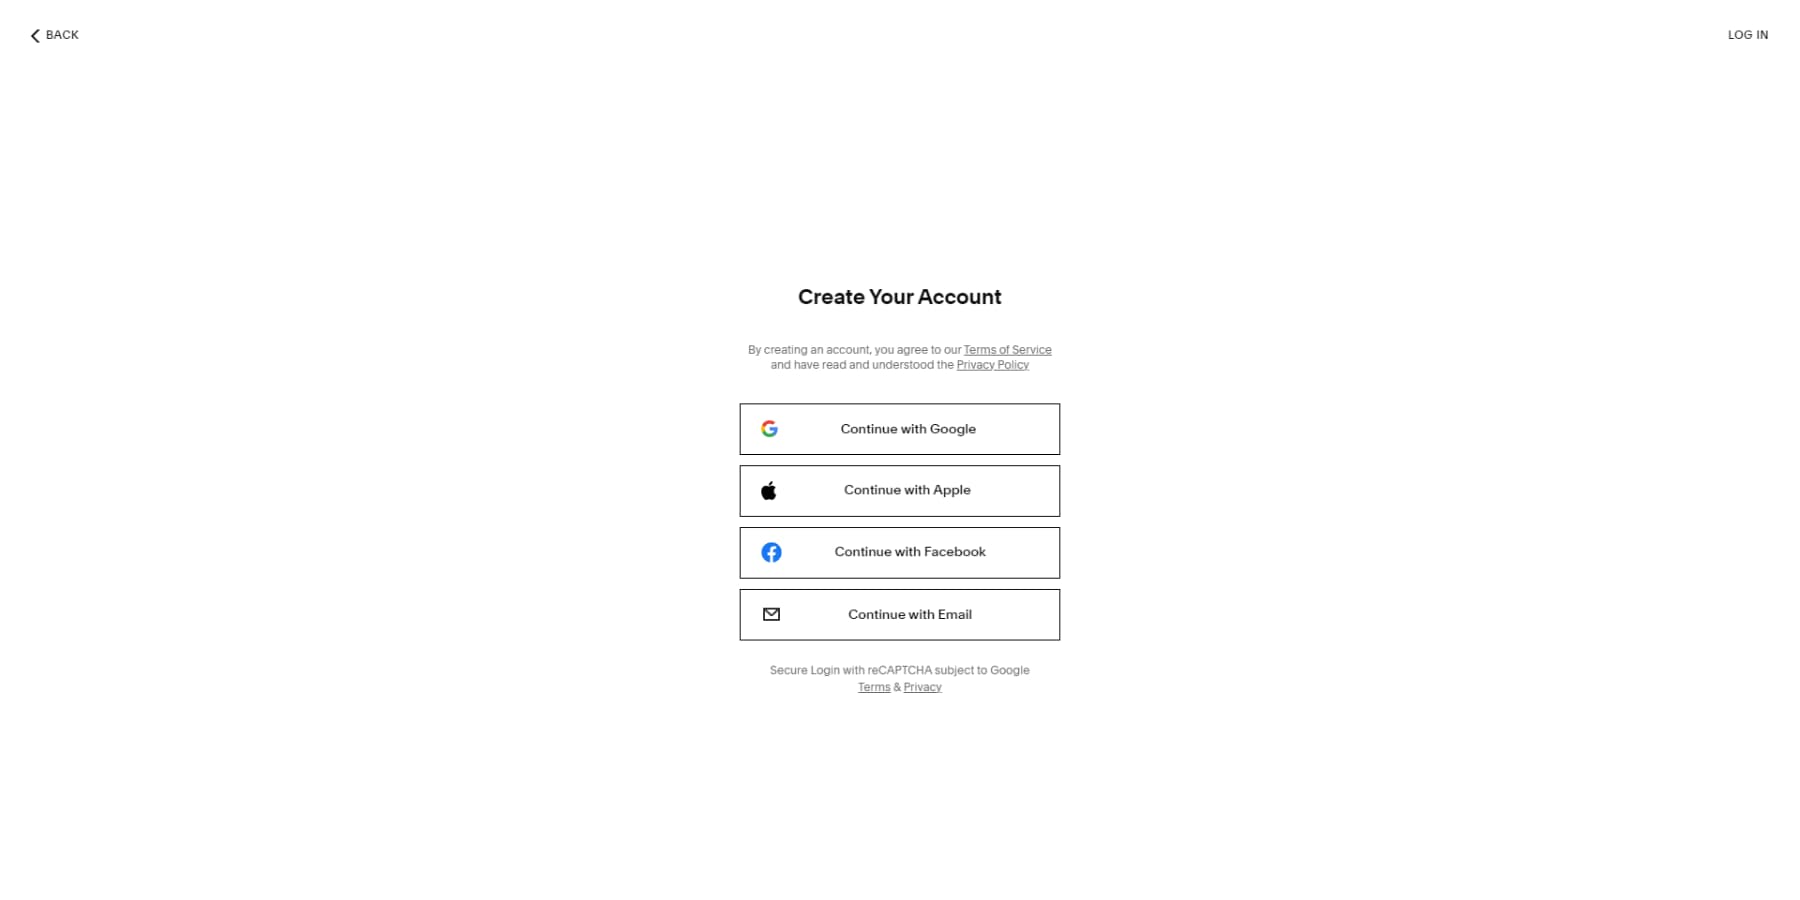 A screenshot of Squarespace's options to sign up